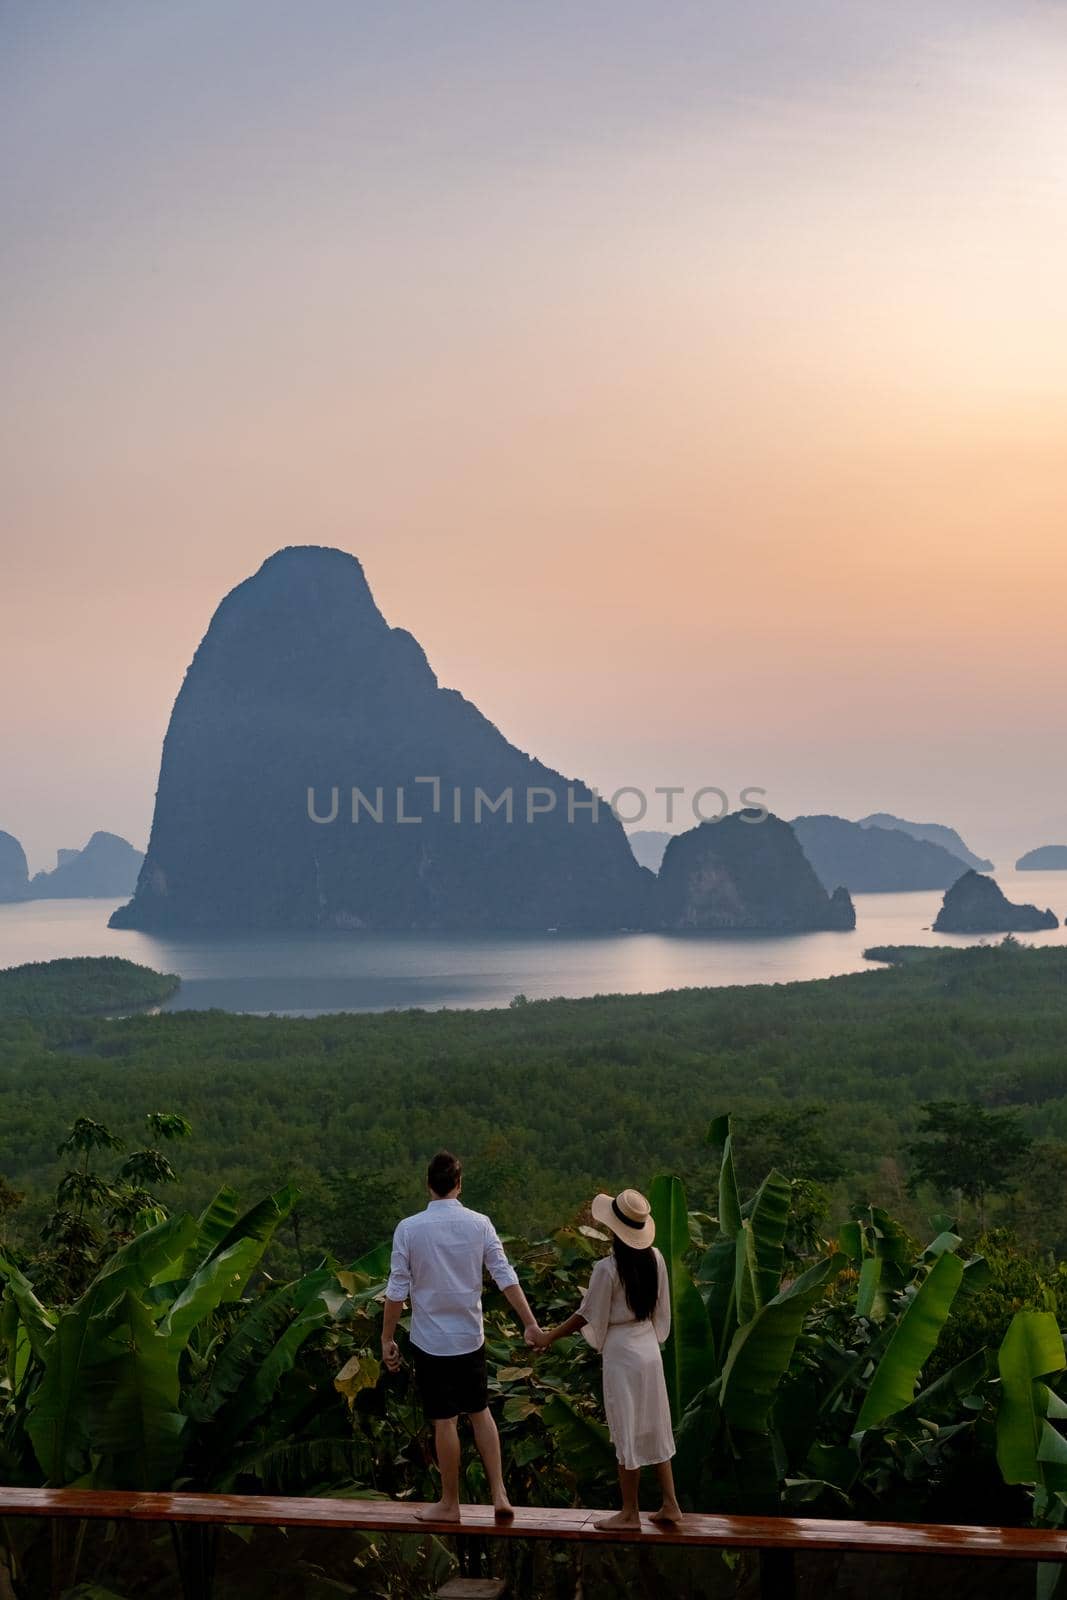 couple men and woman mid age watching sunrise in Phangnga bay Thailand, Phangan bay viewpoint, couple watching sunrise on the edge of a swimming pool, infinity pool look out over Phangnga Bay Thailand